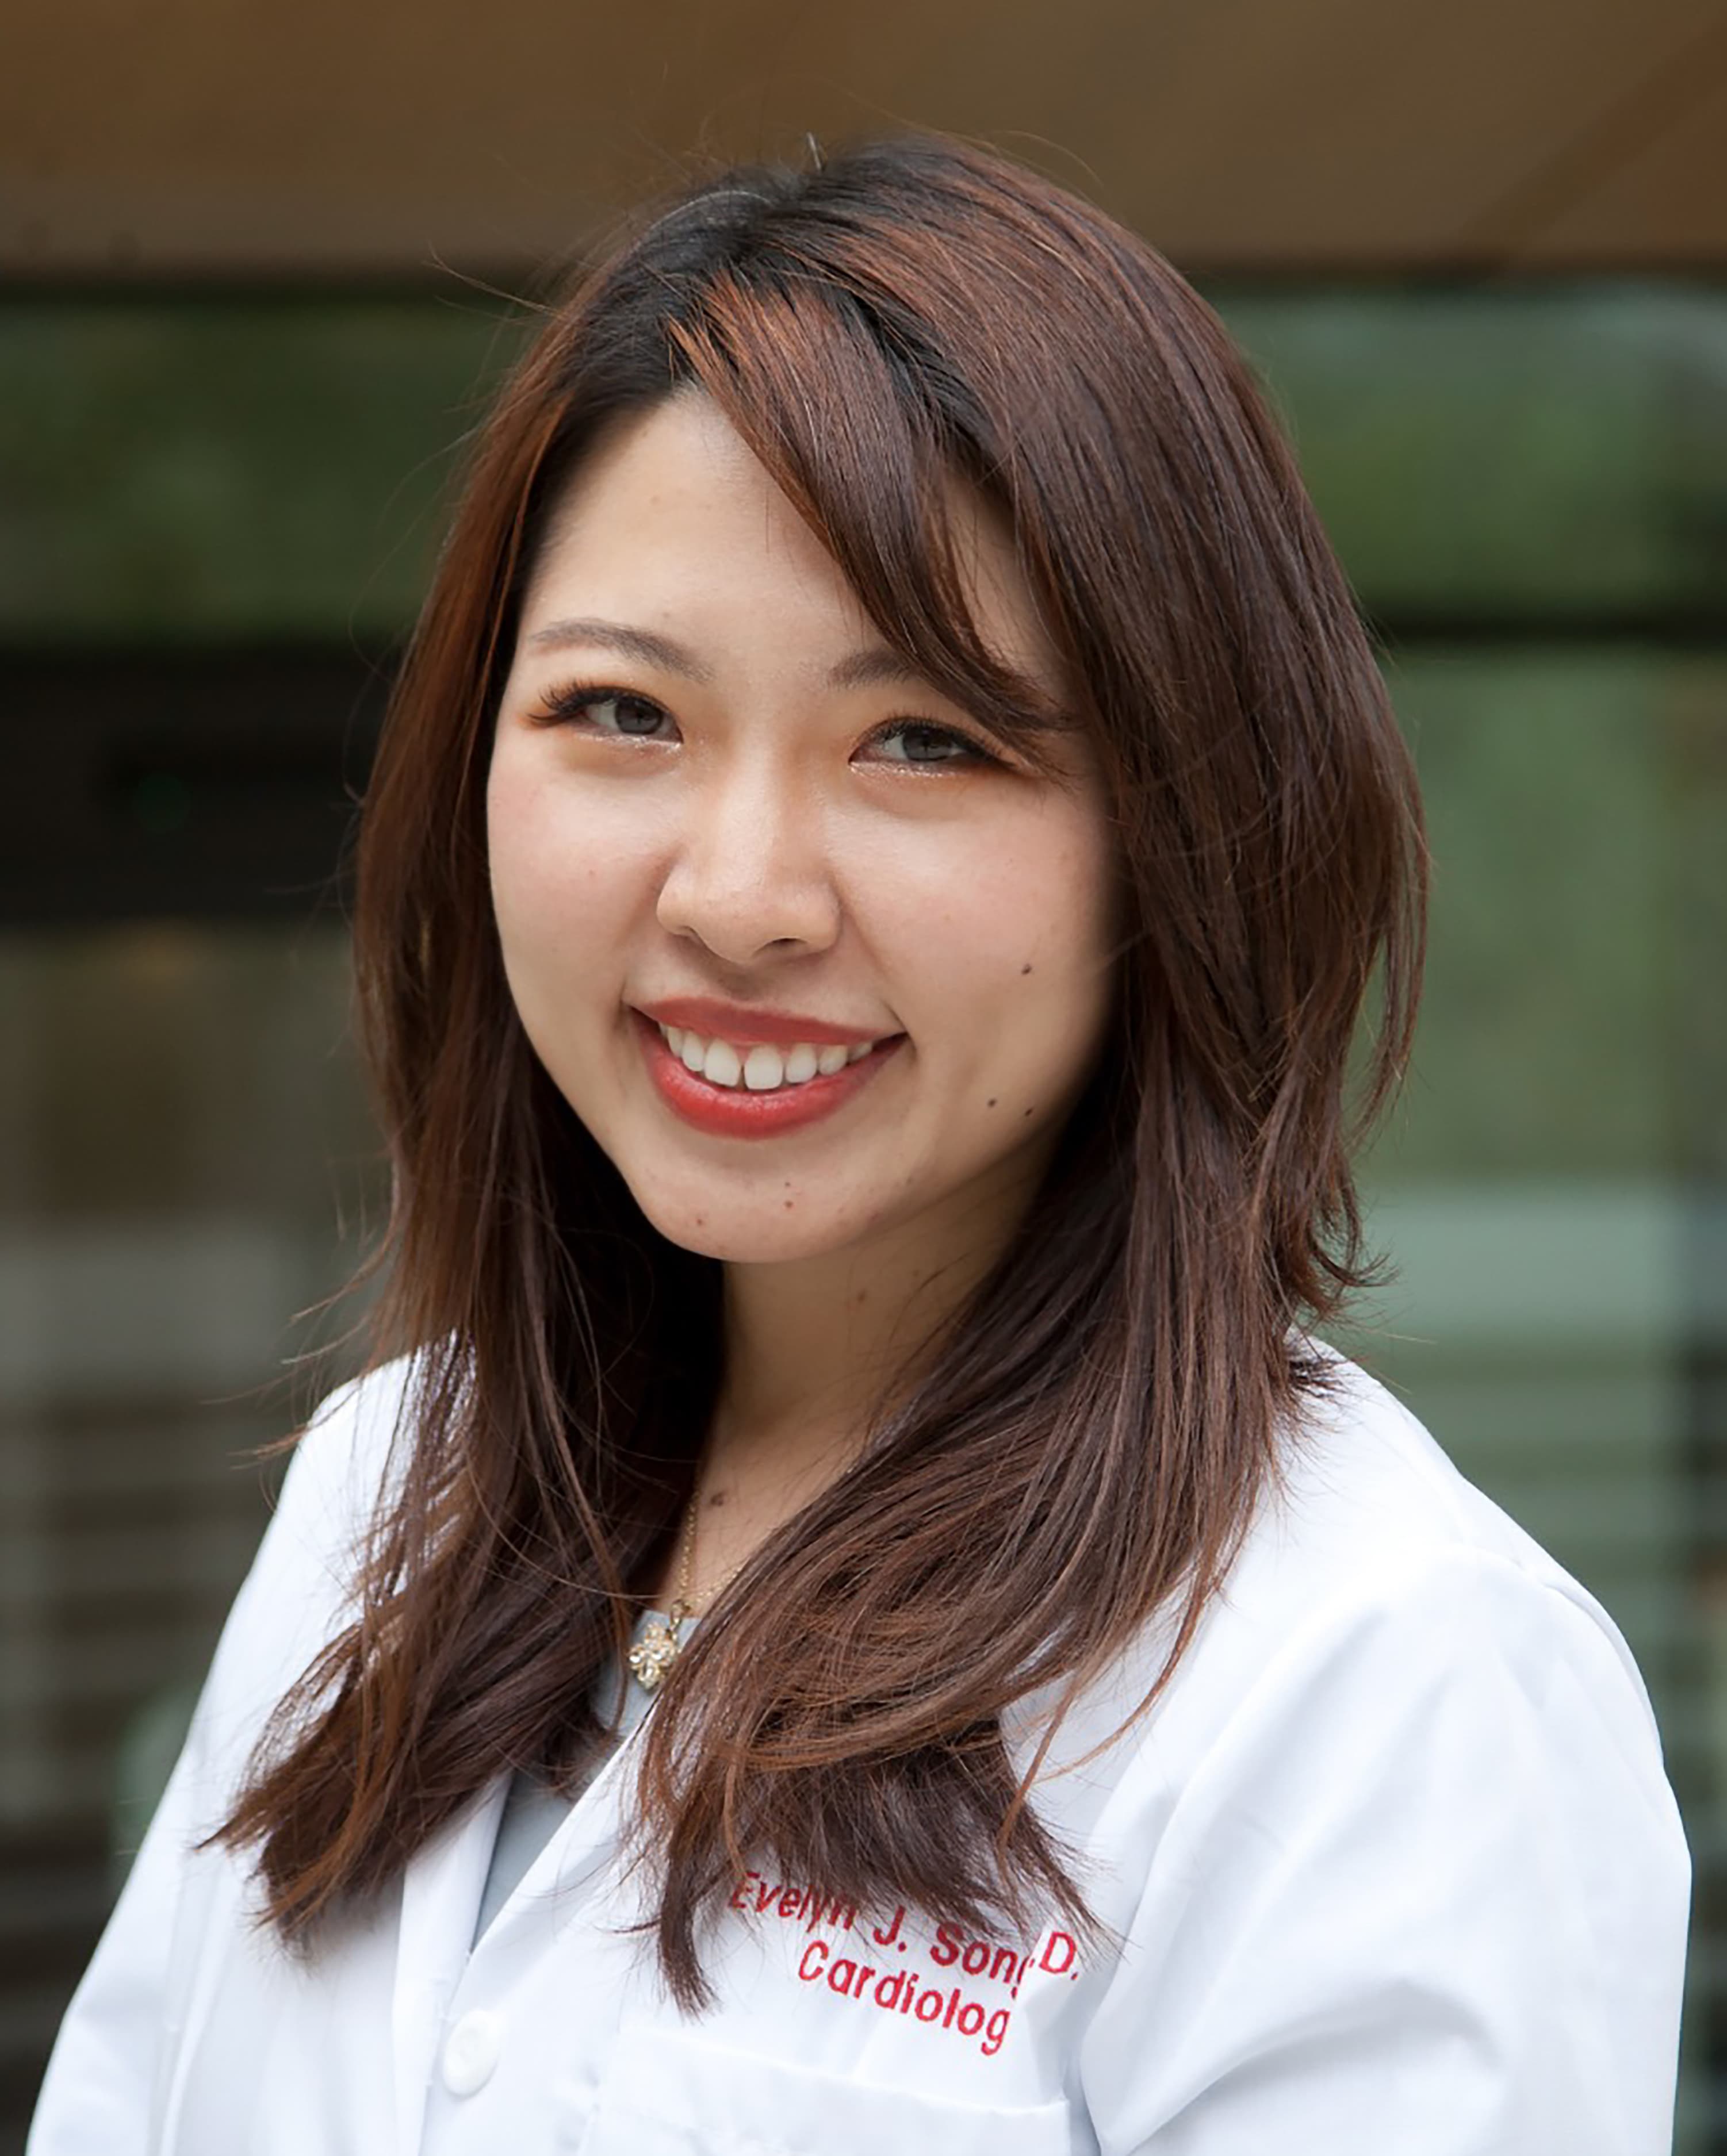 Dr Evelyn Song